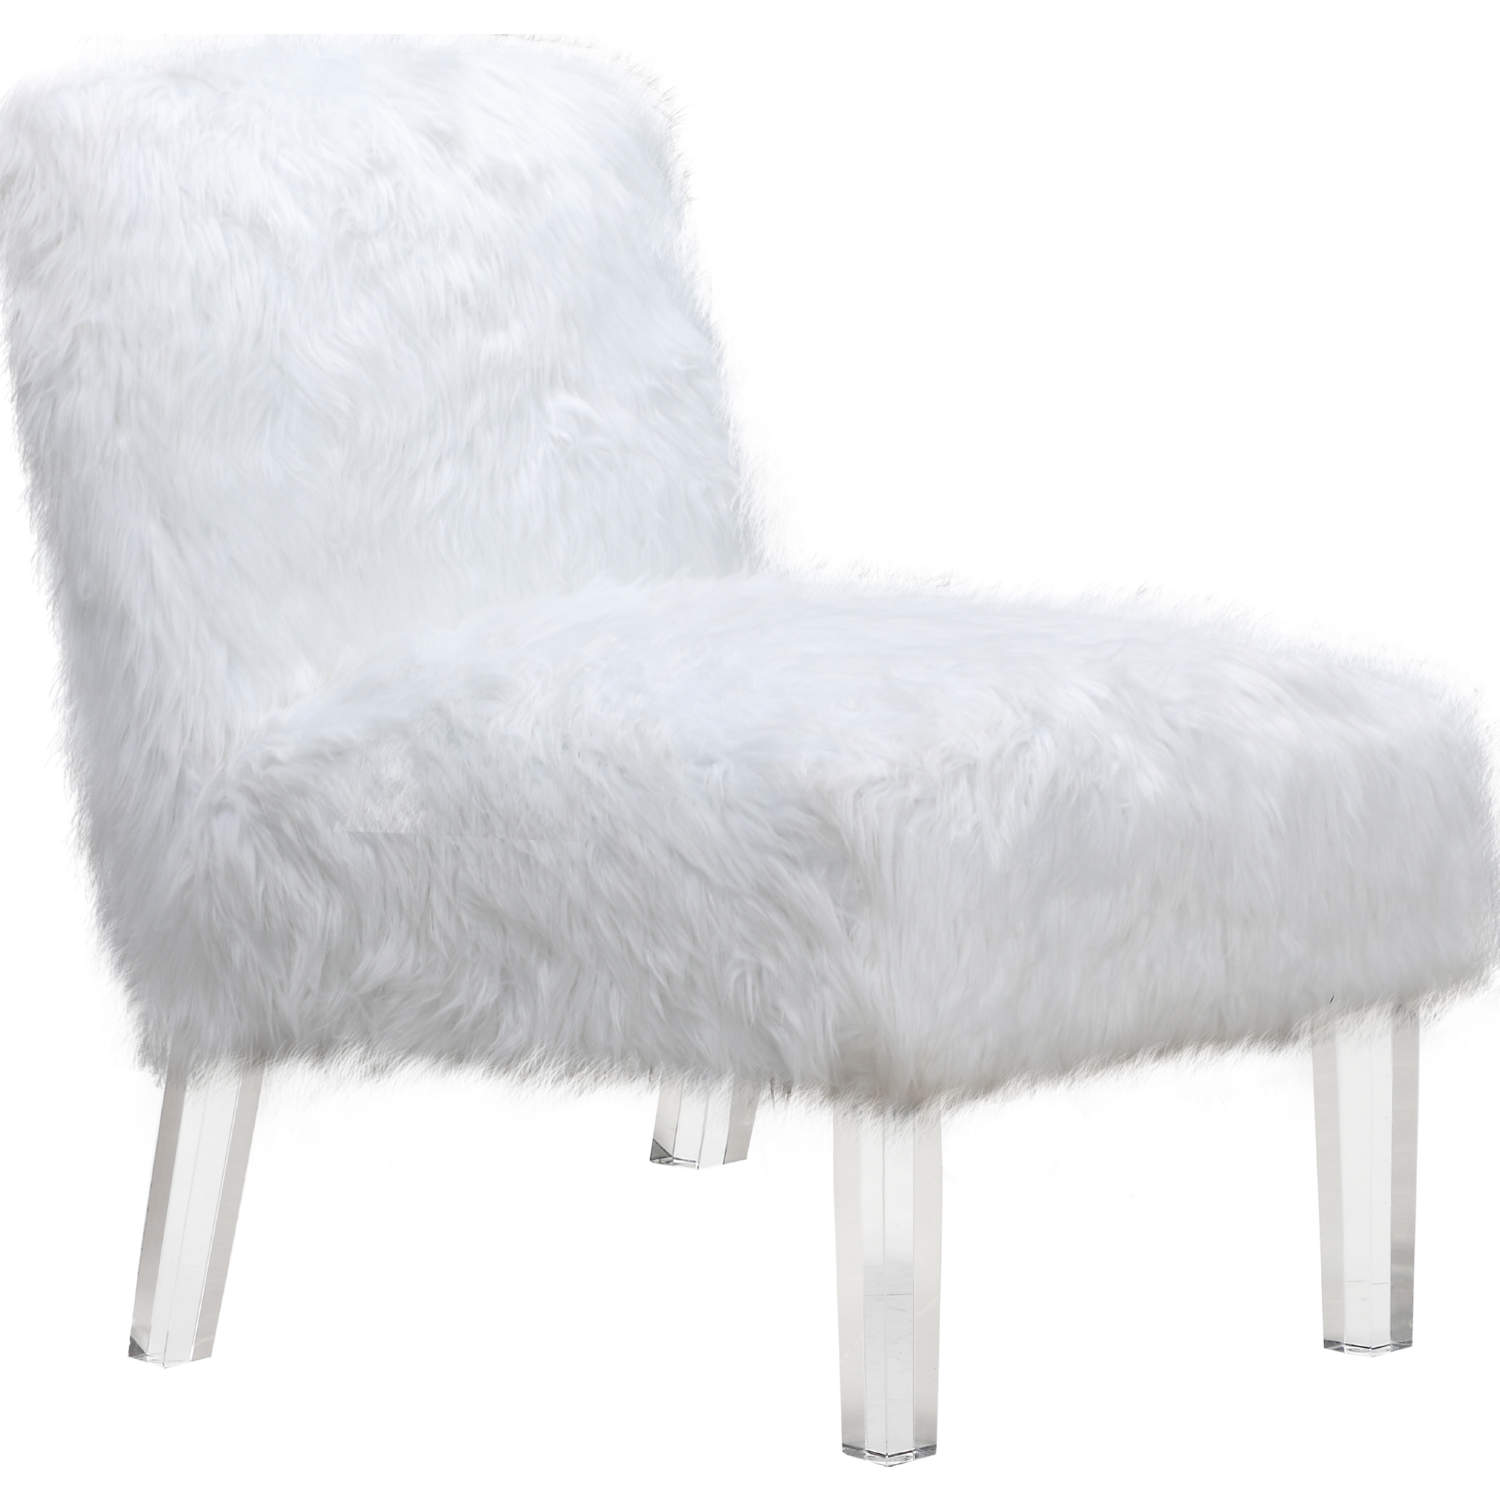 Black Fur Accent Chair Therefore, when picking an